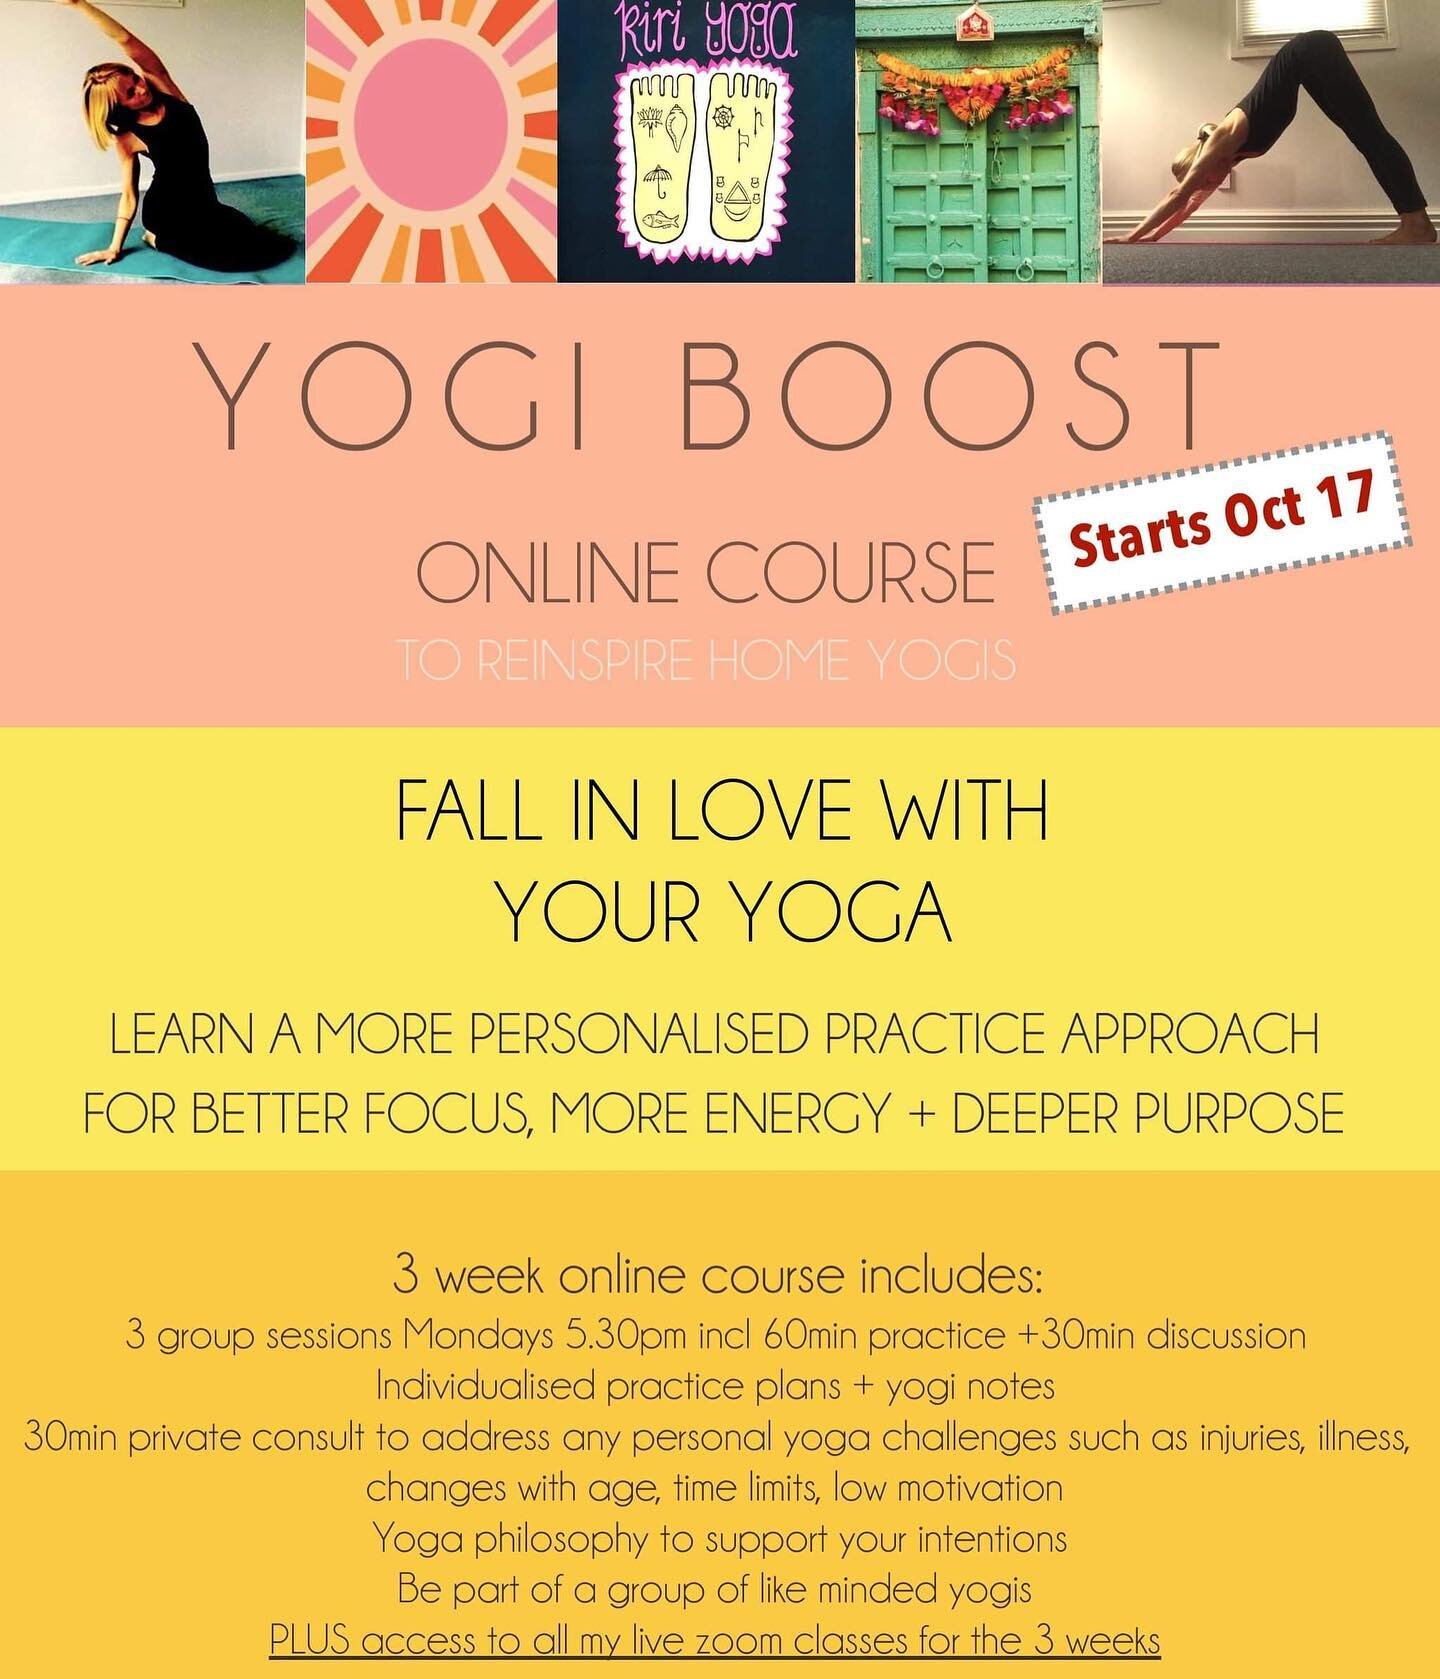 Yogi Boost is back! Be inspired, motivated, confident, focused. Love your practice!
30mins 4x week for 3 weeks 💪😄